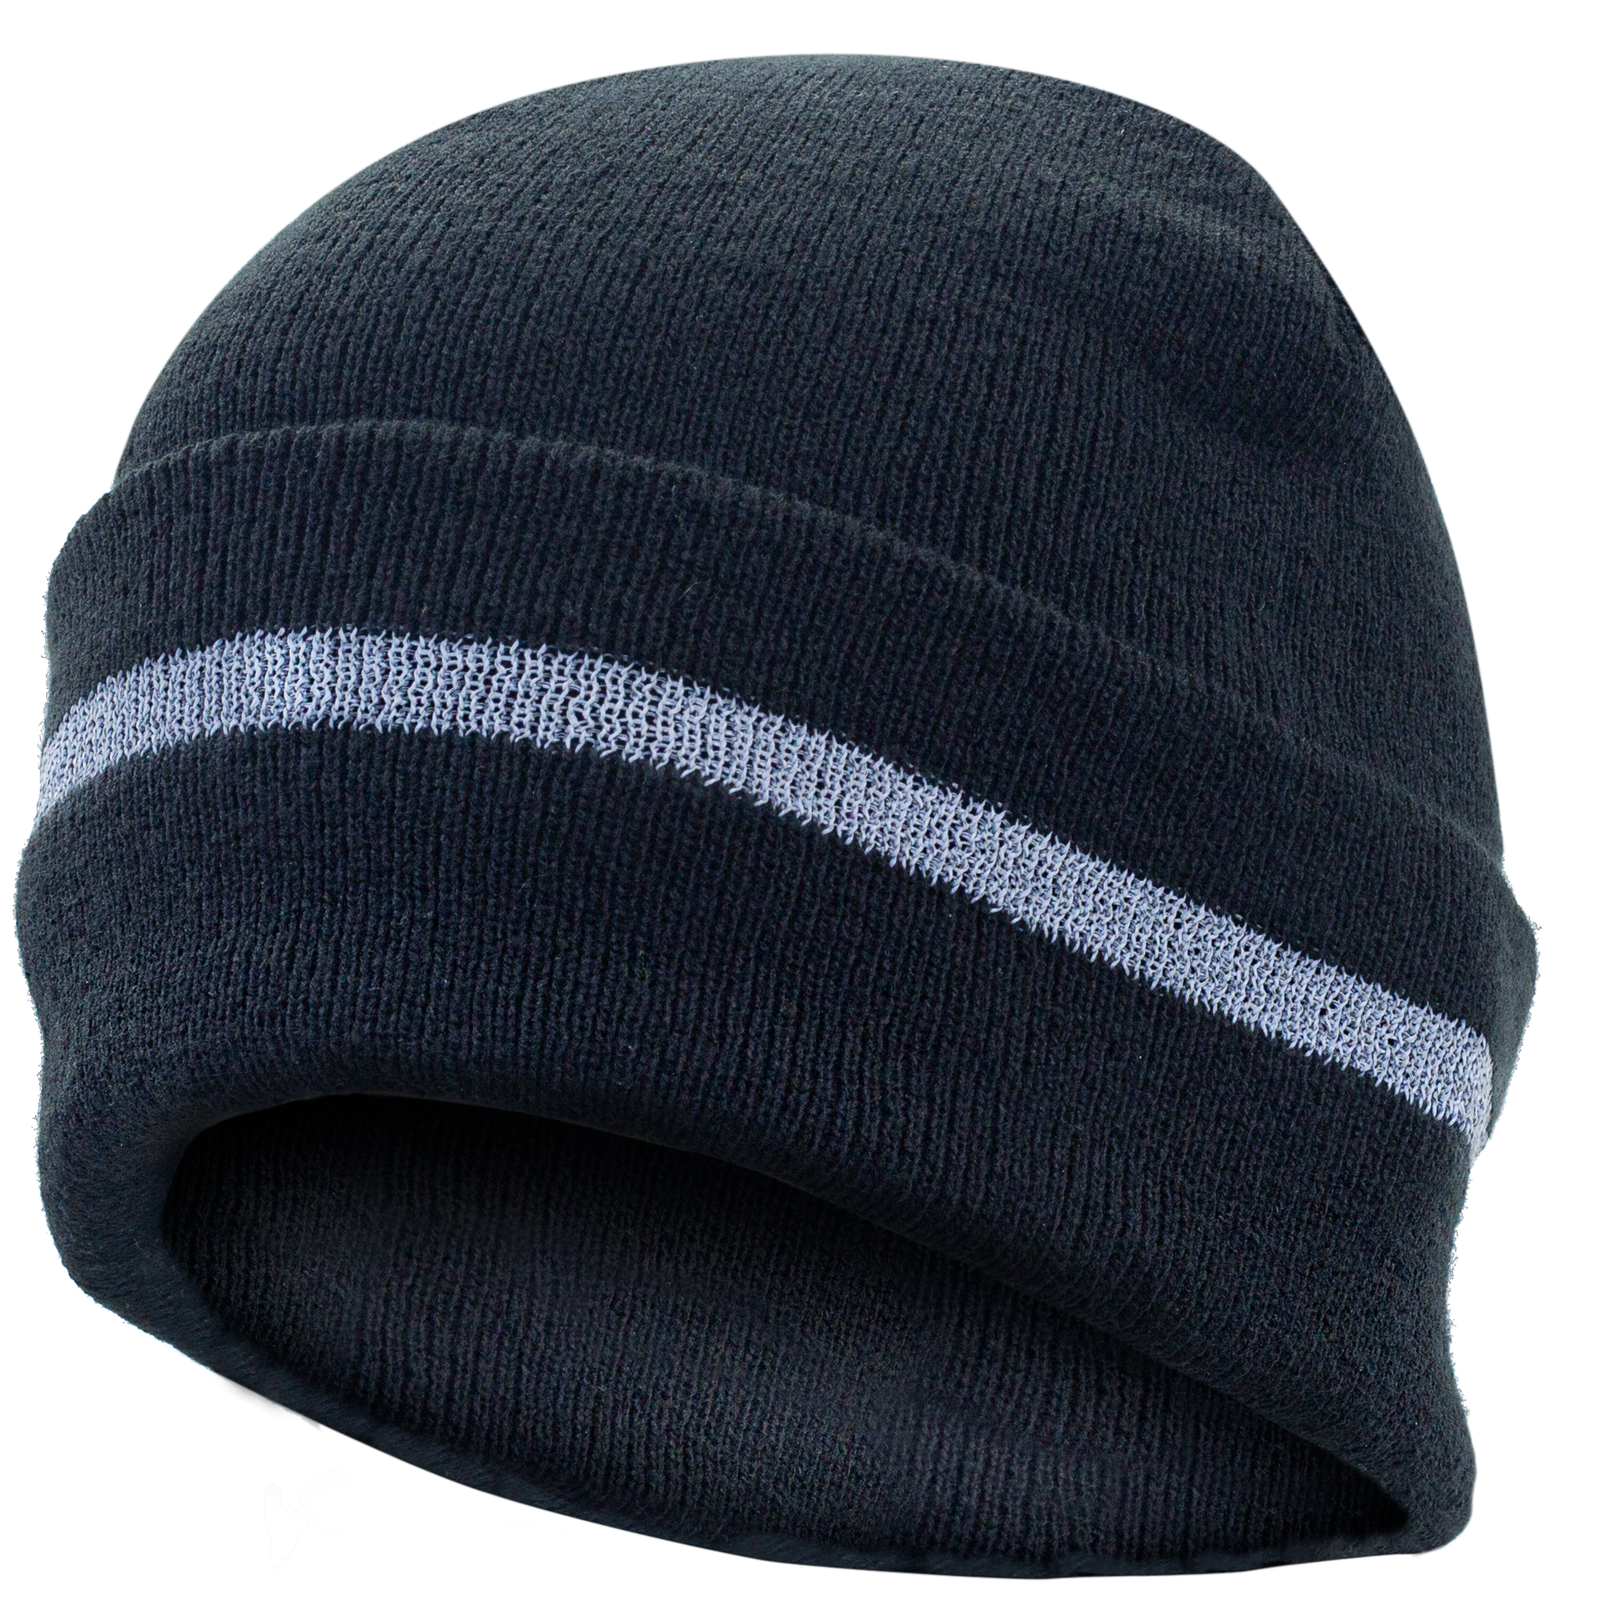 Features the JORESTECH black beanie with reflective stripe over white background